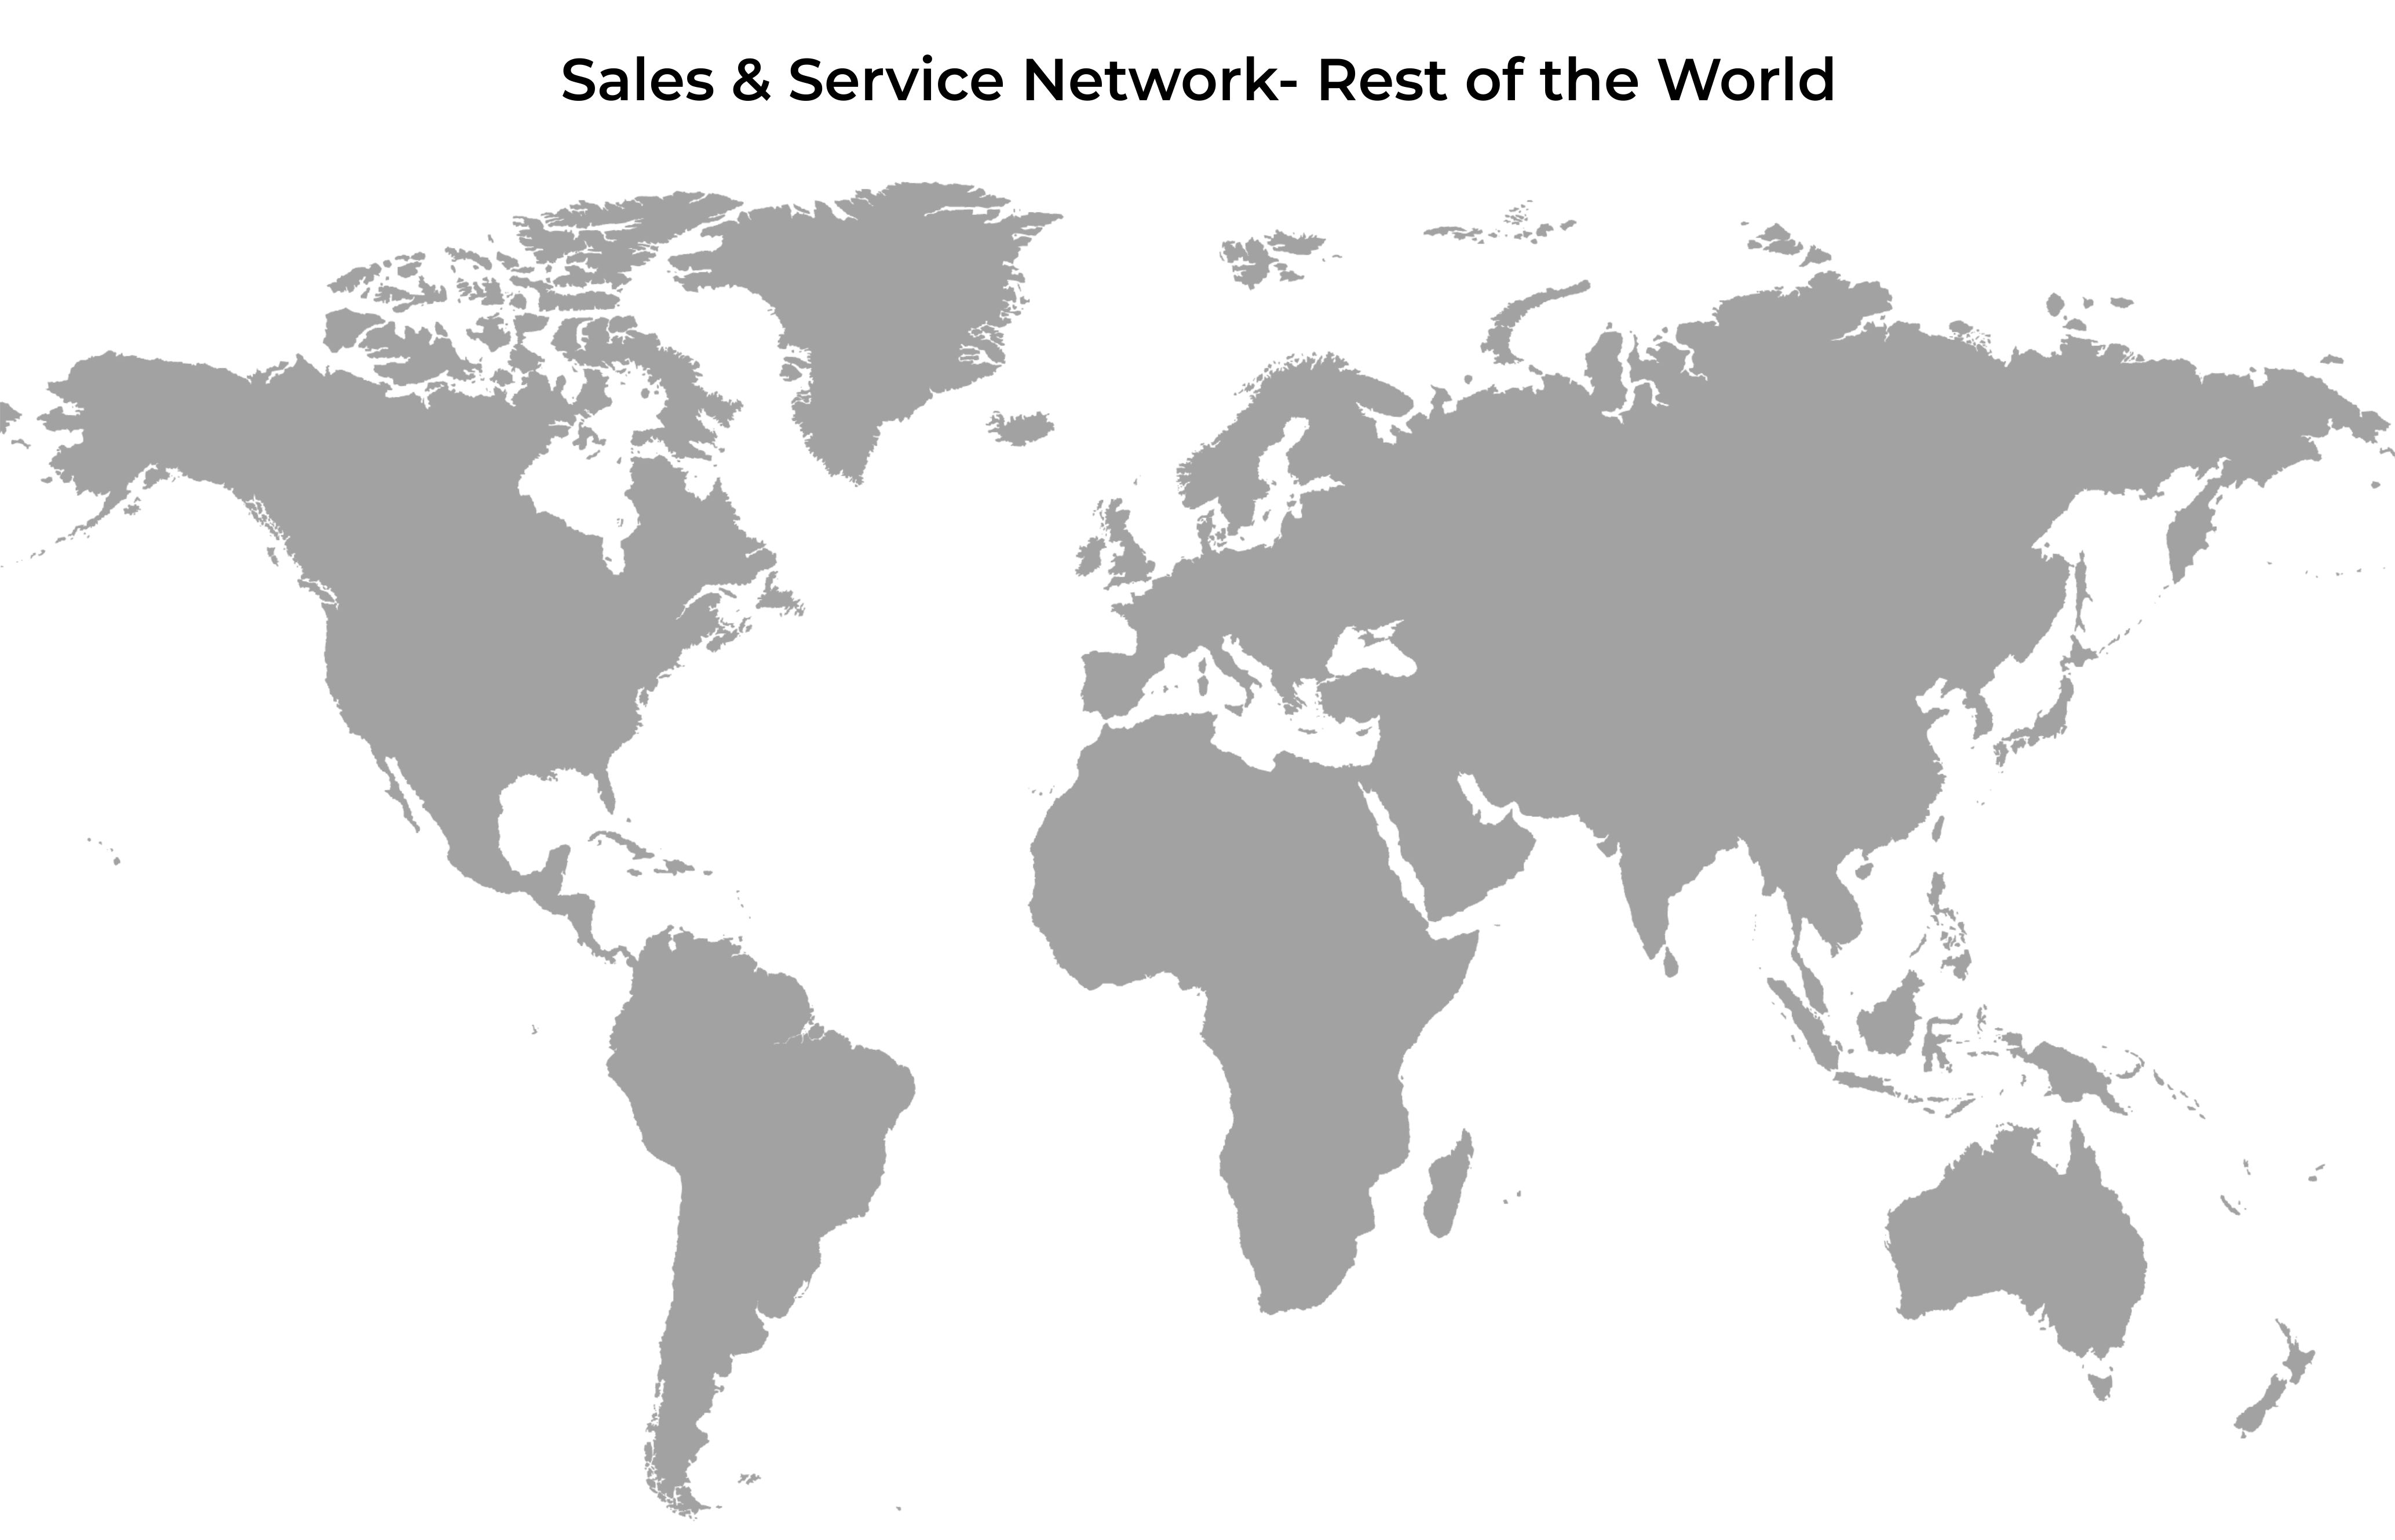 BST eltromat India Sales & Service Network Rest of the World